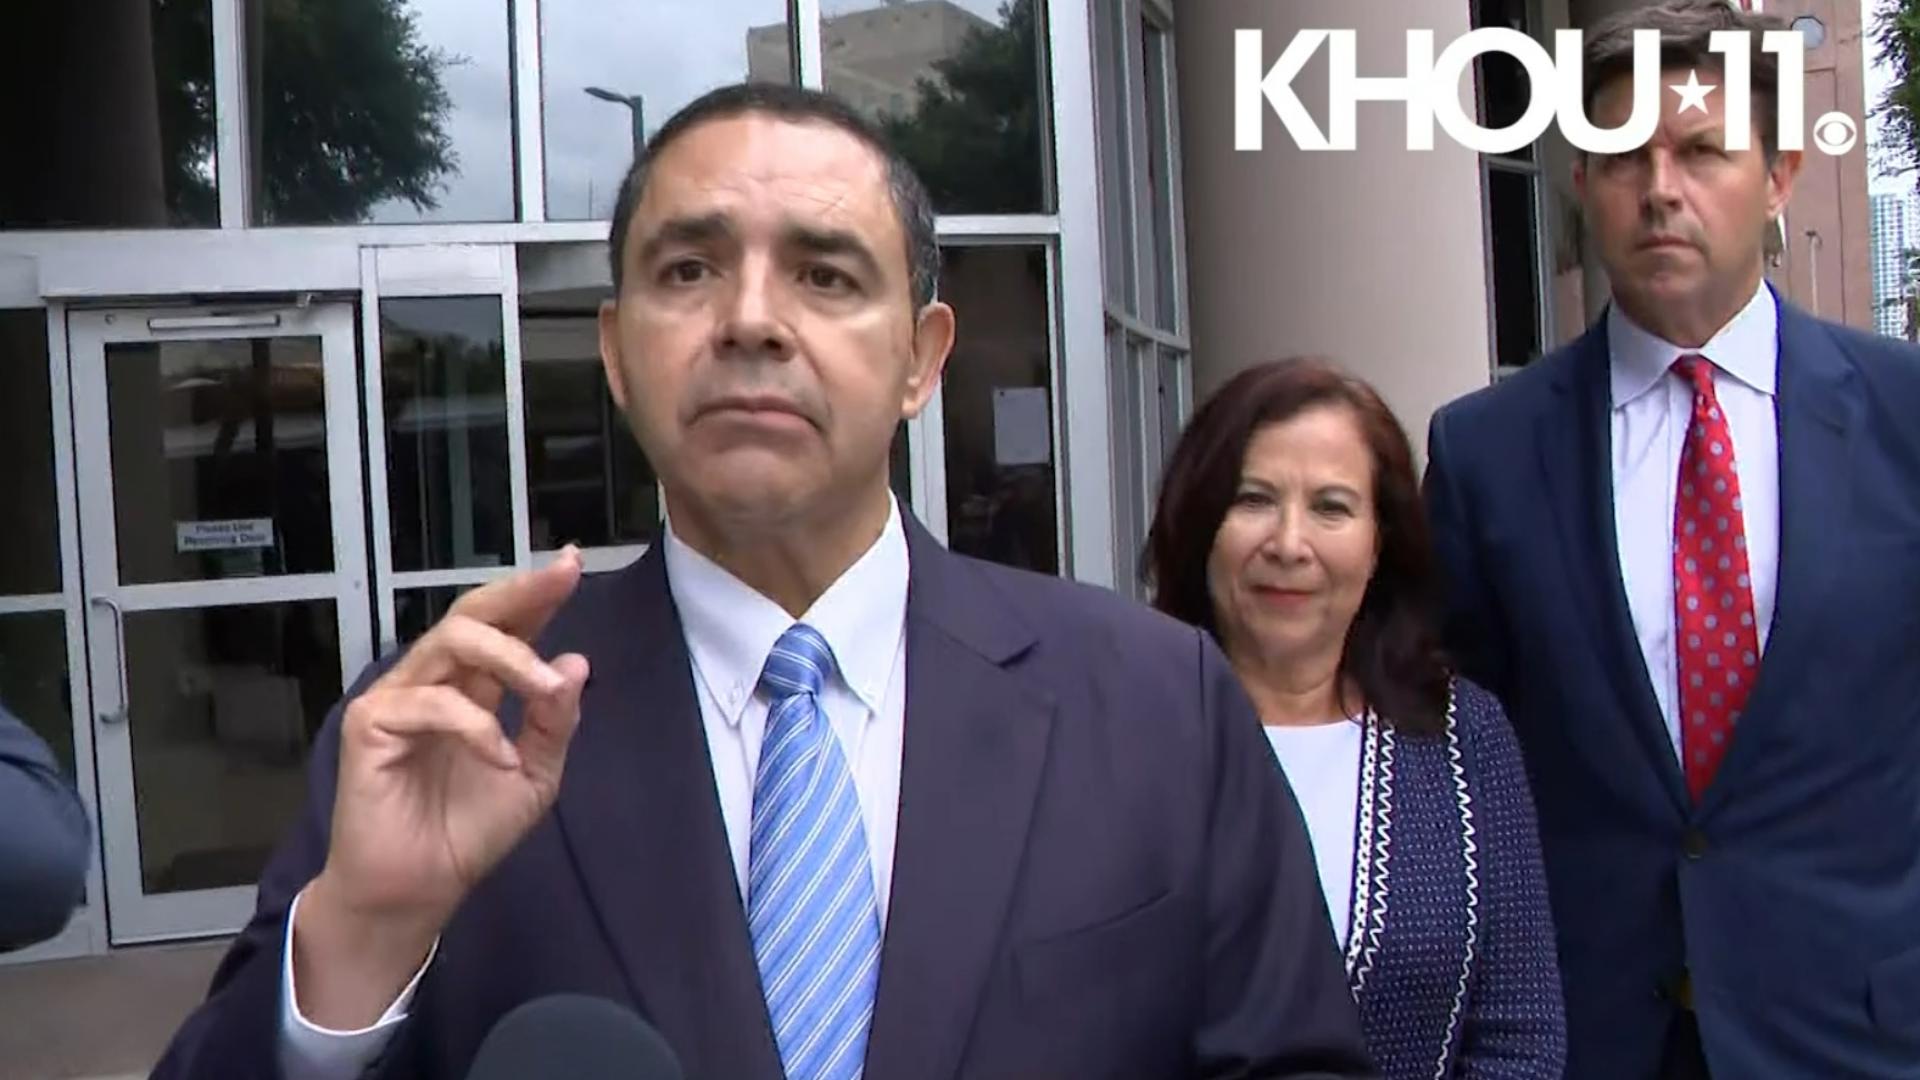 Texas Democratic U.S. Rep. Henry Cuellar and his wife were indicted on conspiracy and bribery charges and taken into custody on Friday, May 3.